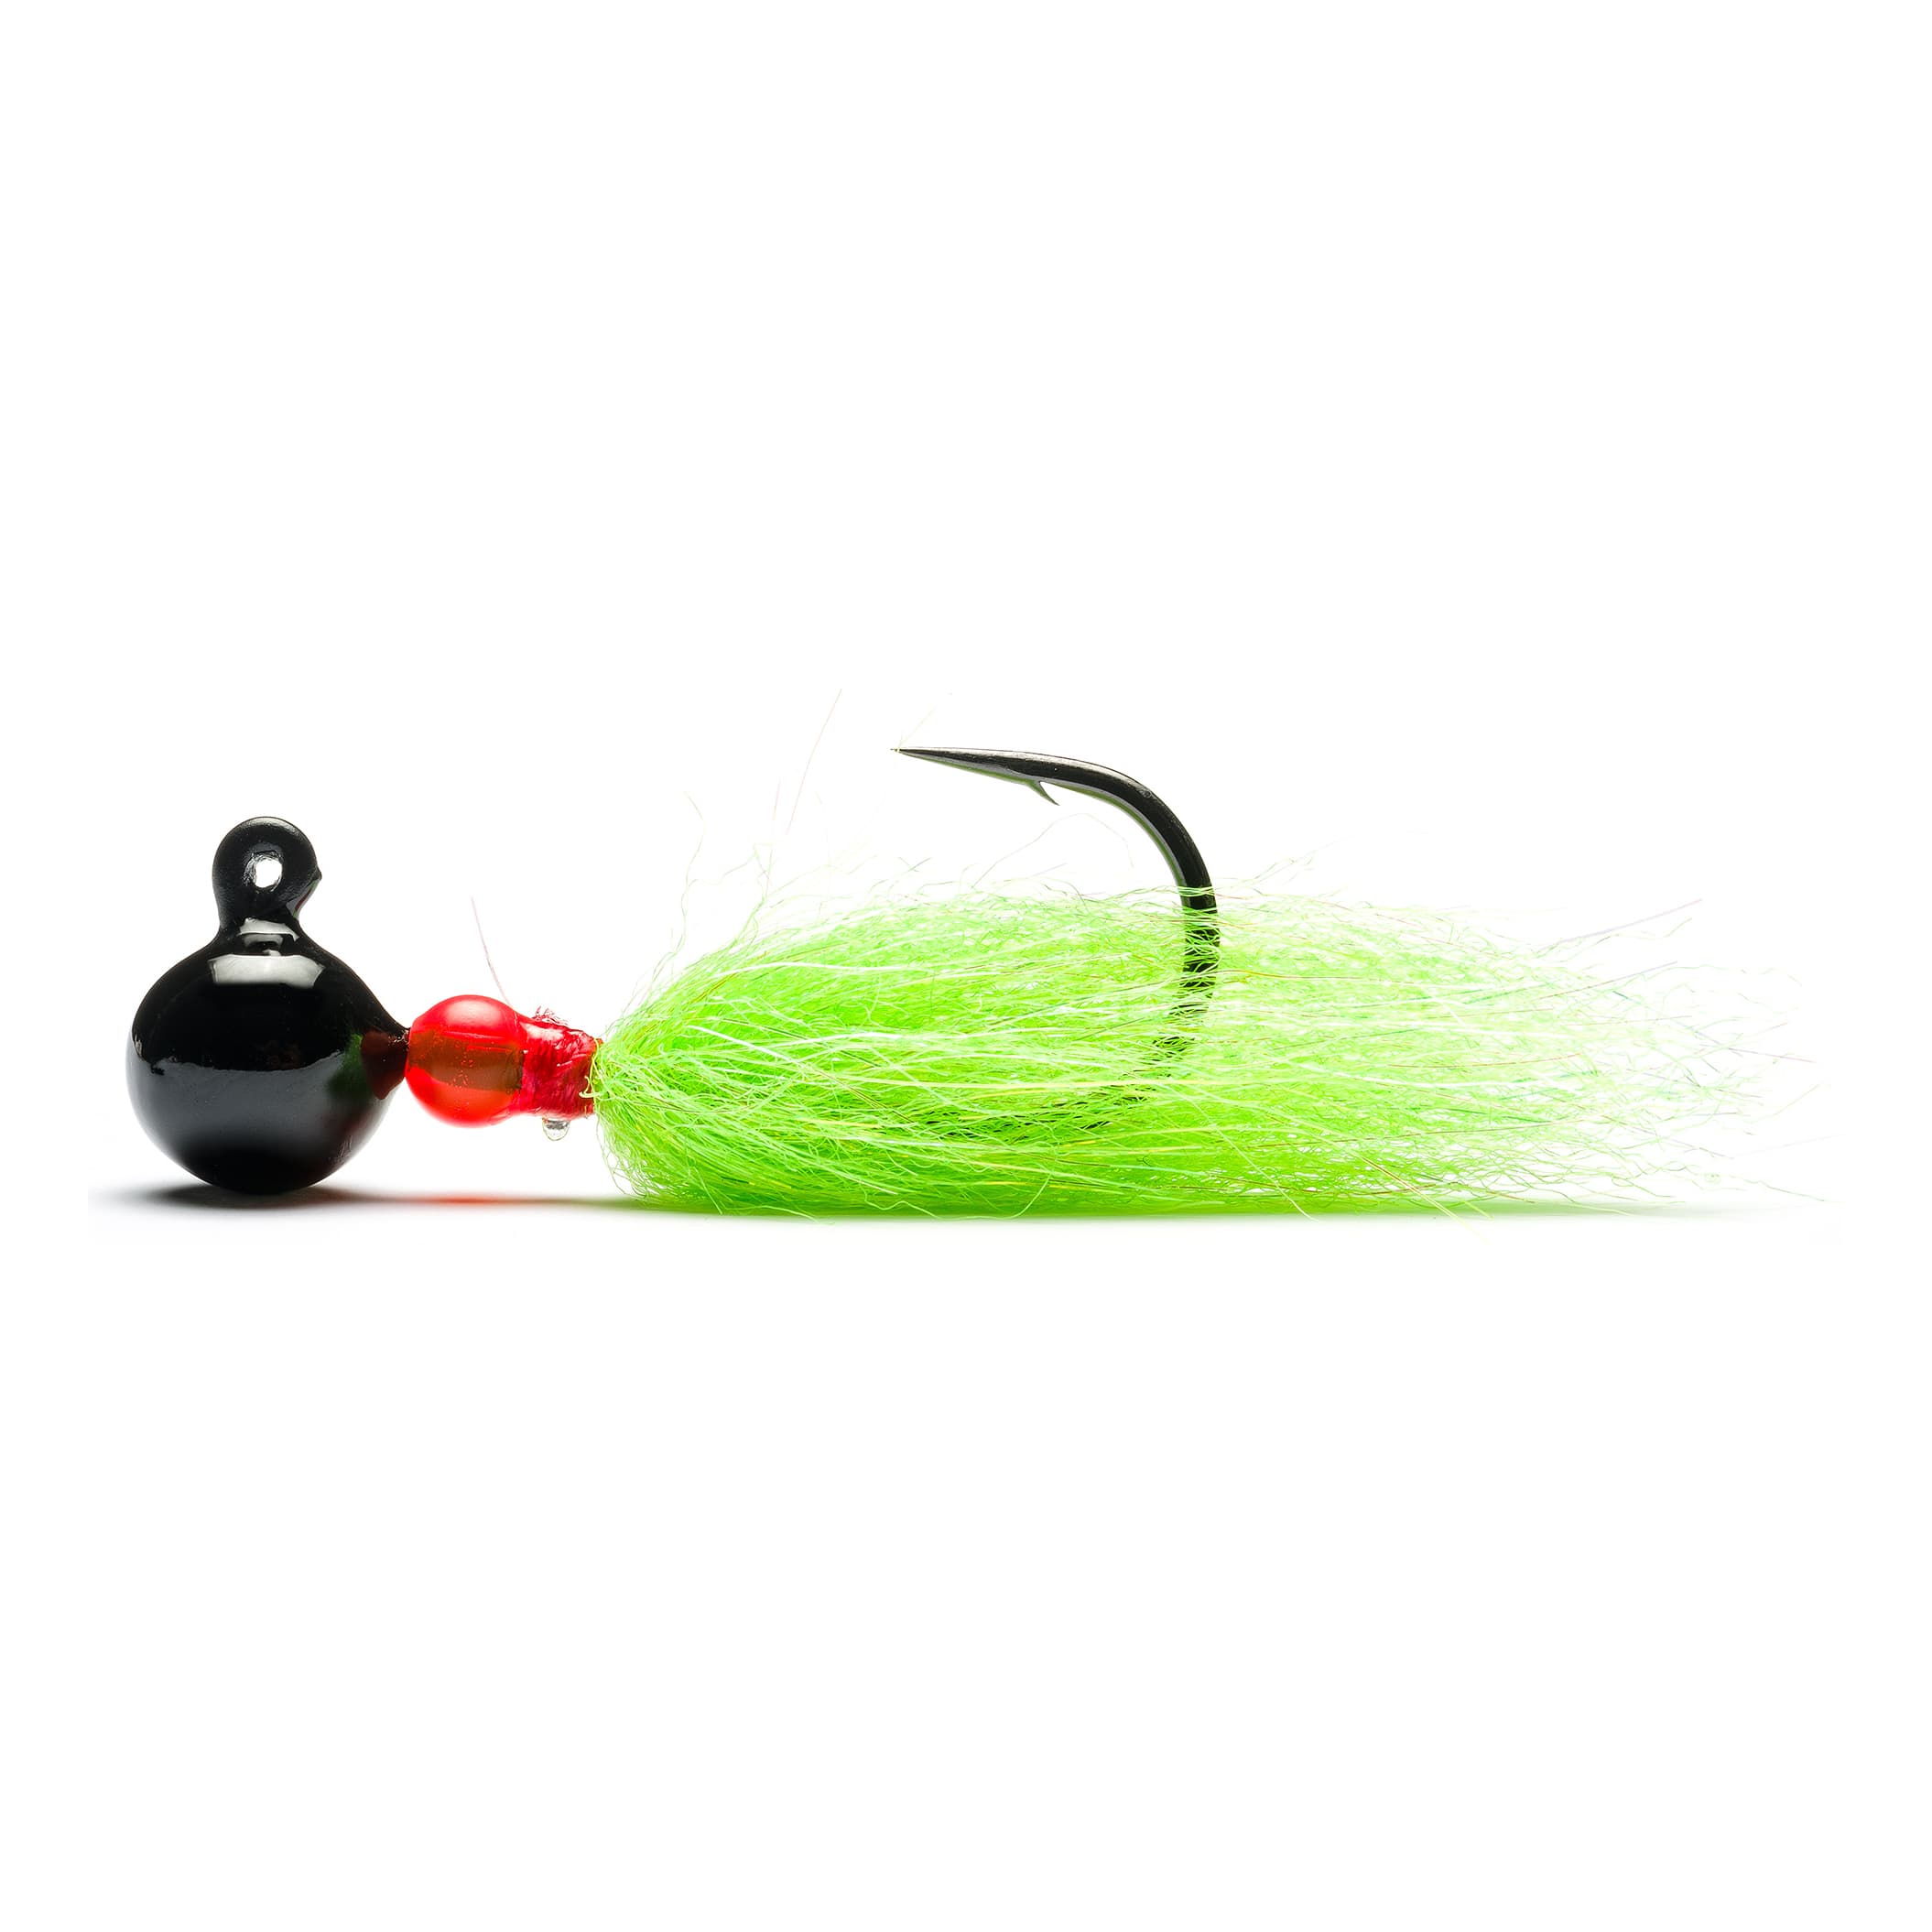 Our Functional and stylish ADX Addicted Micro Worm Jig Head